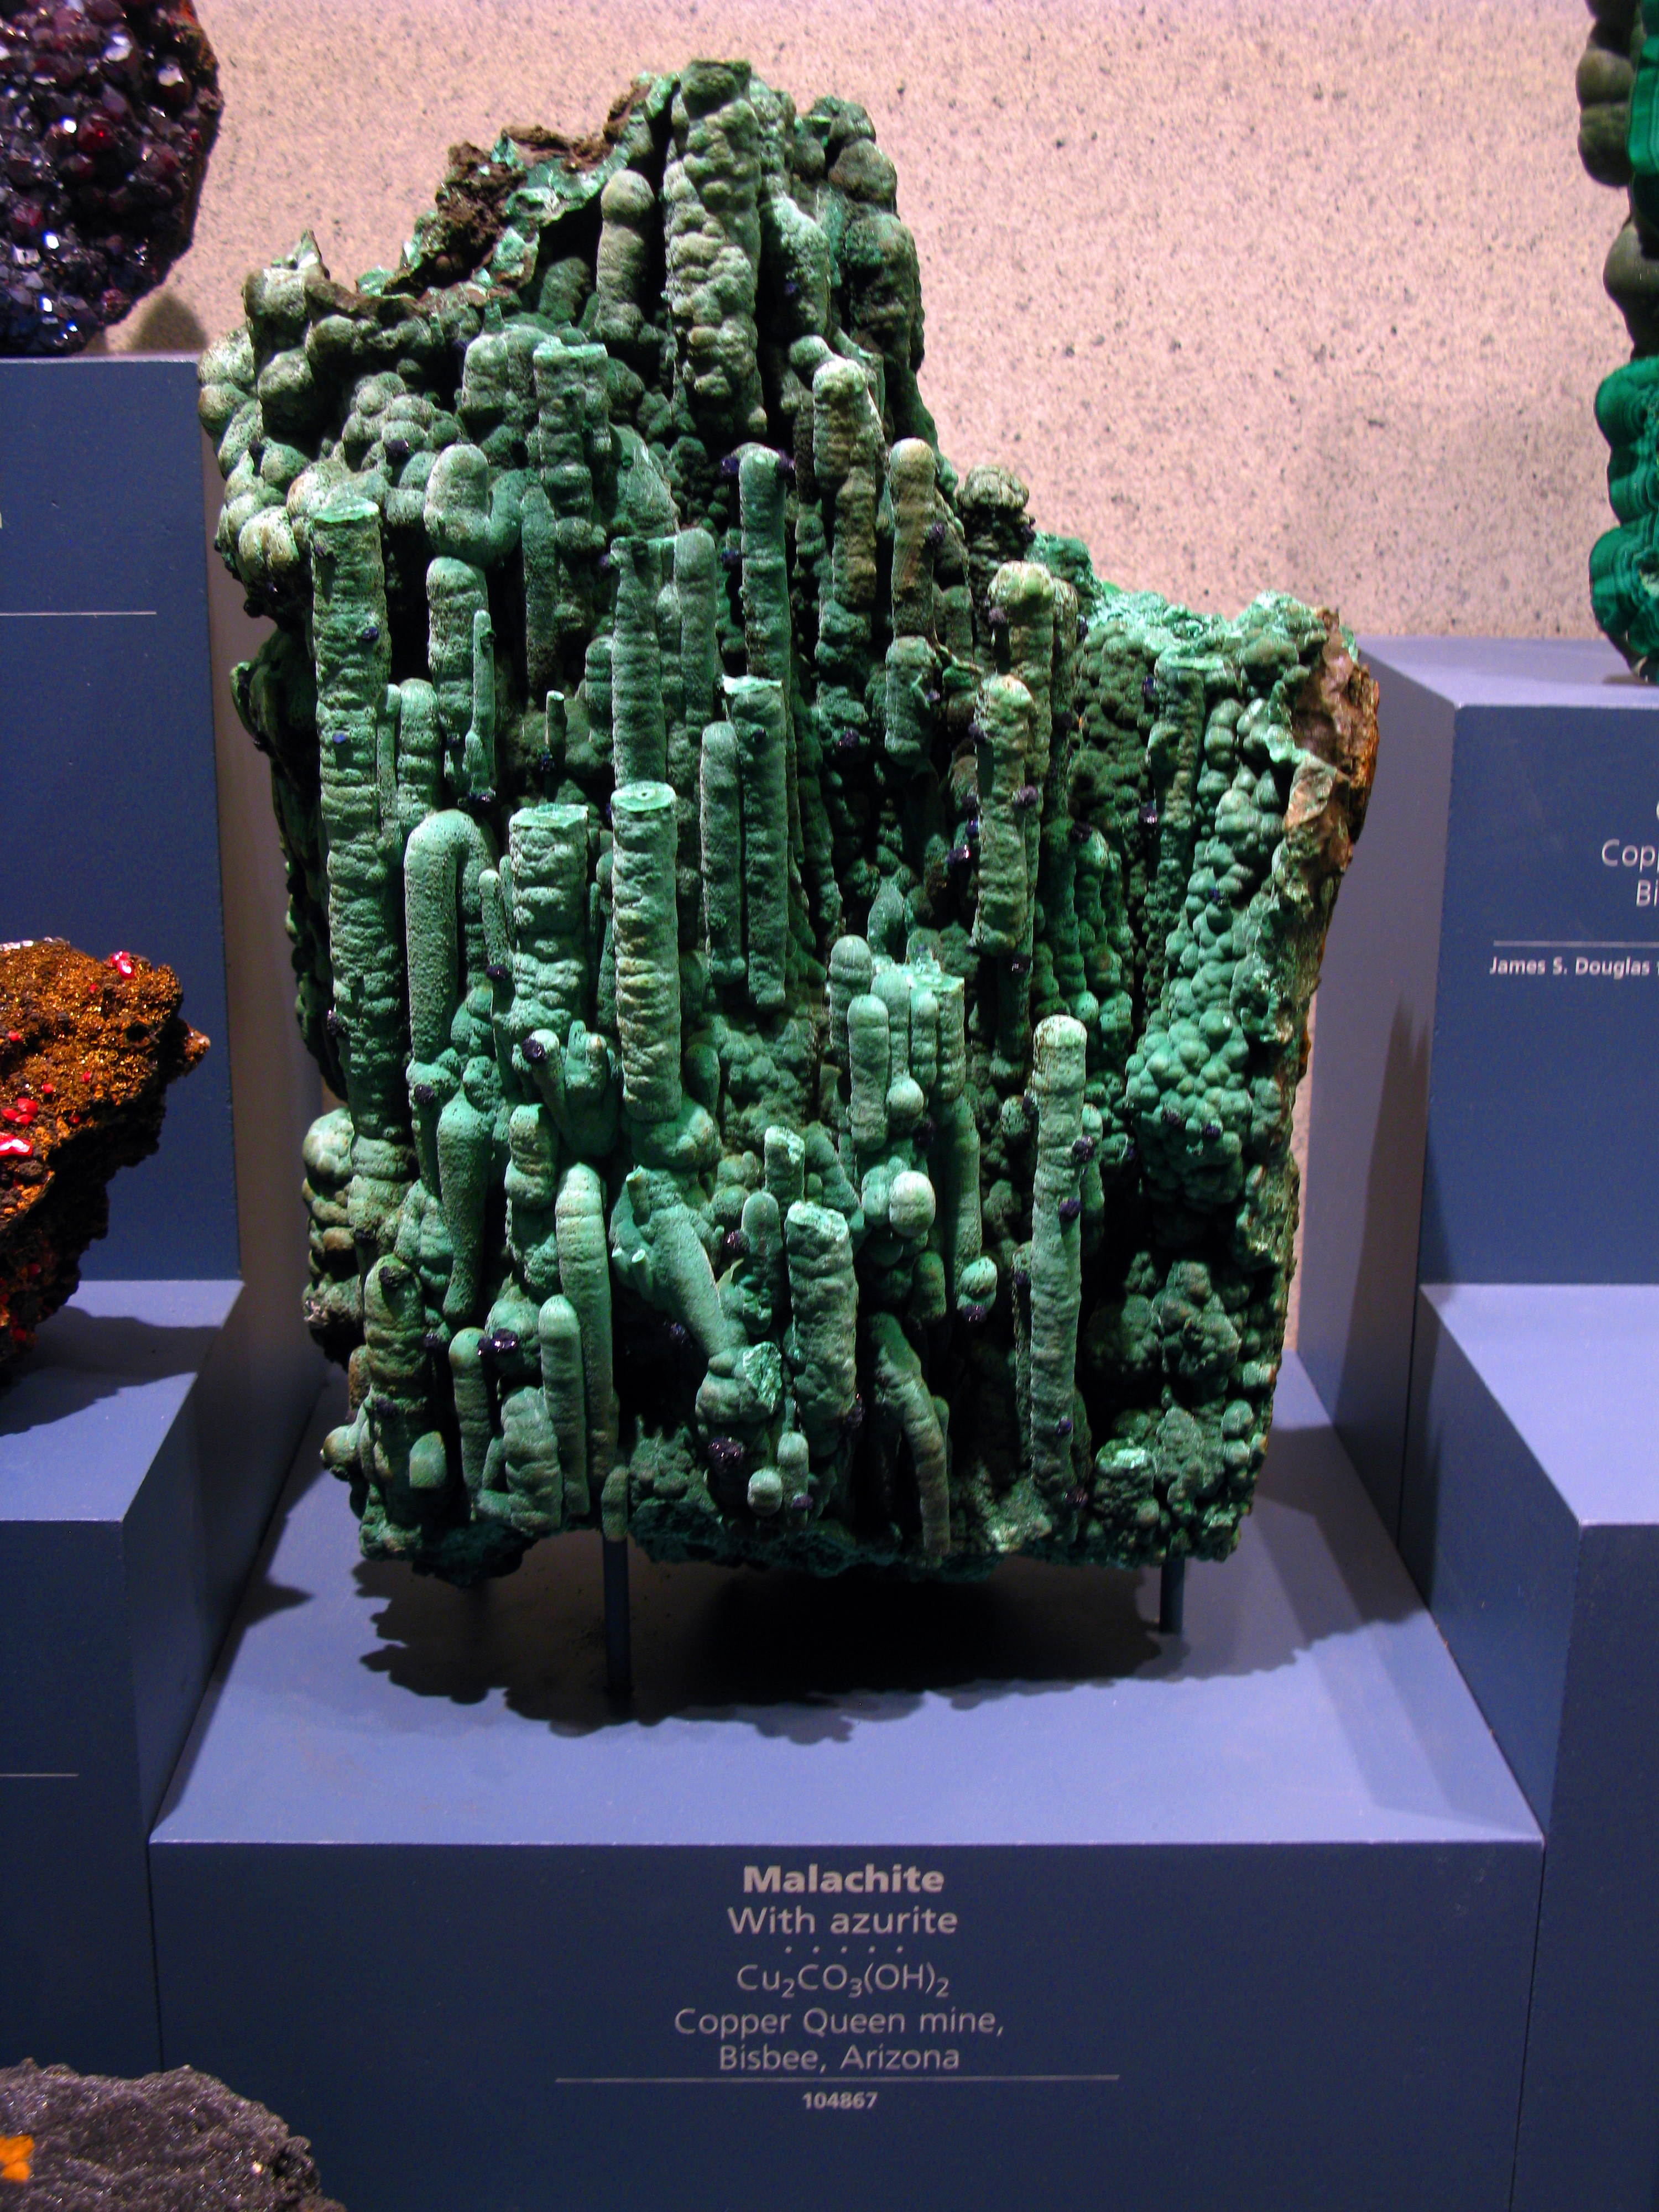 Malachite (with Azurite) - National Museum of Natural History - Washington, D.C.